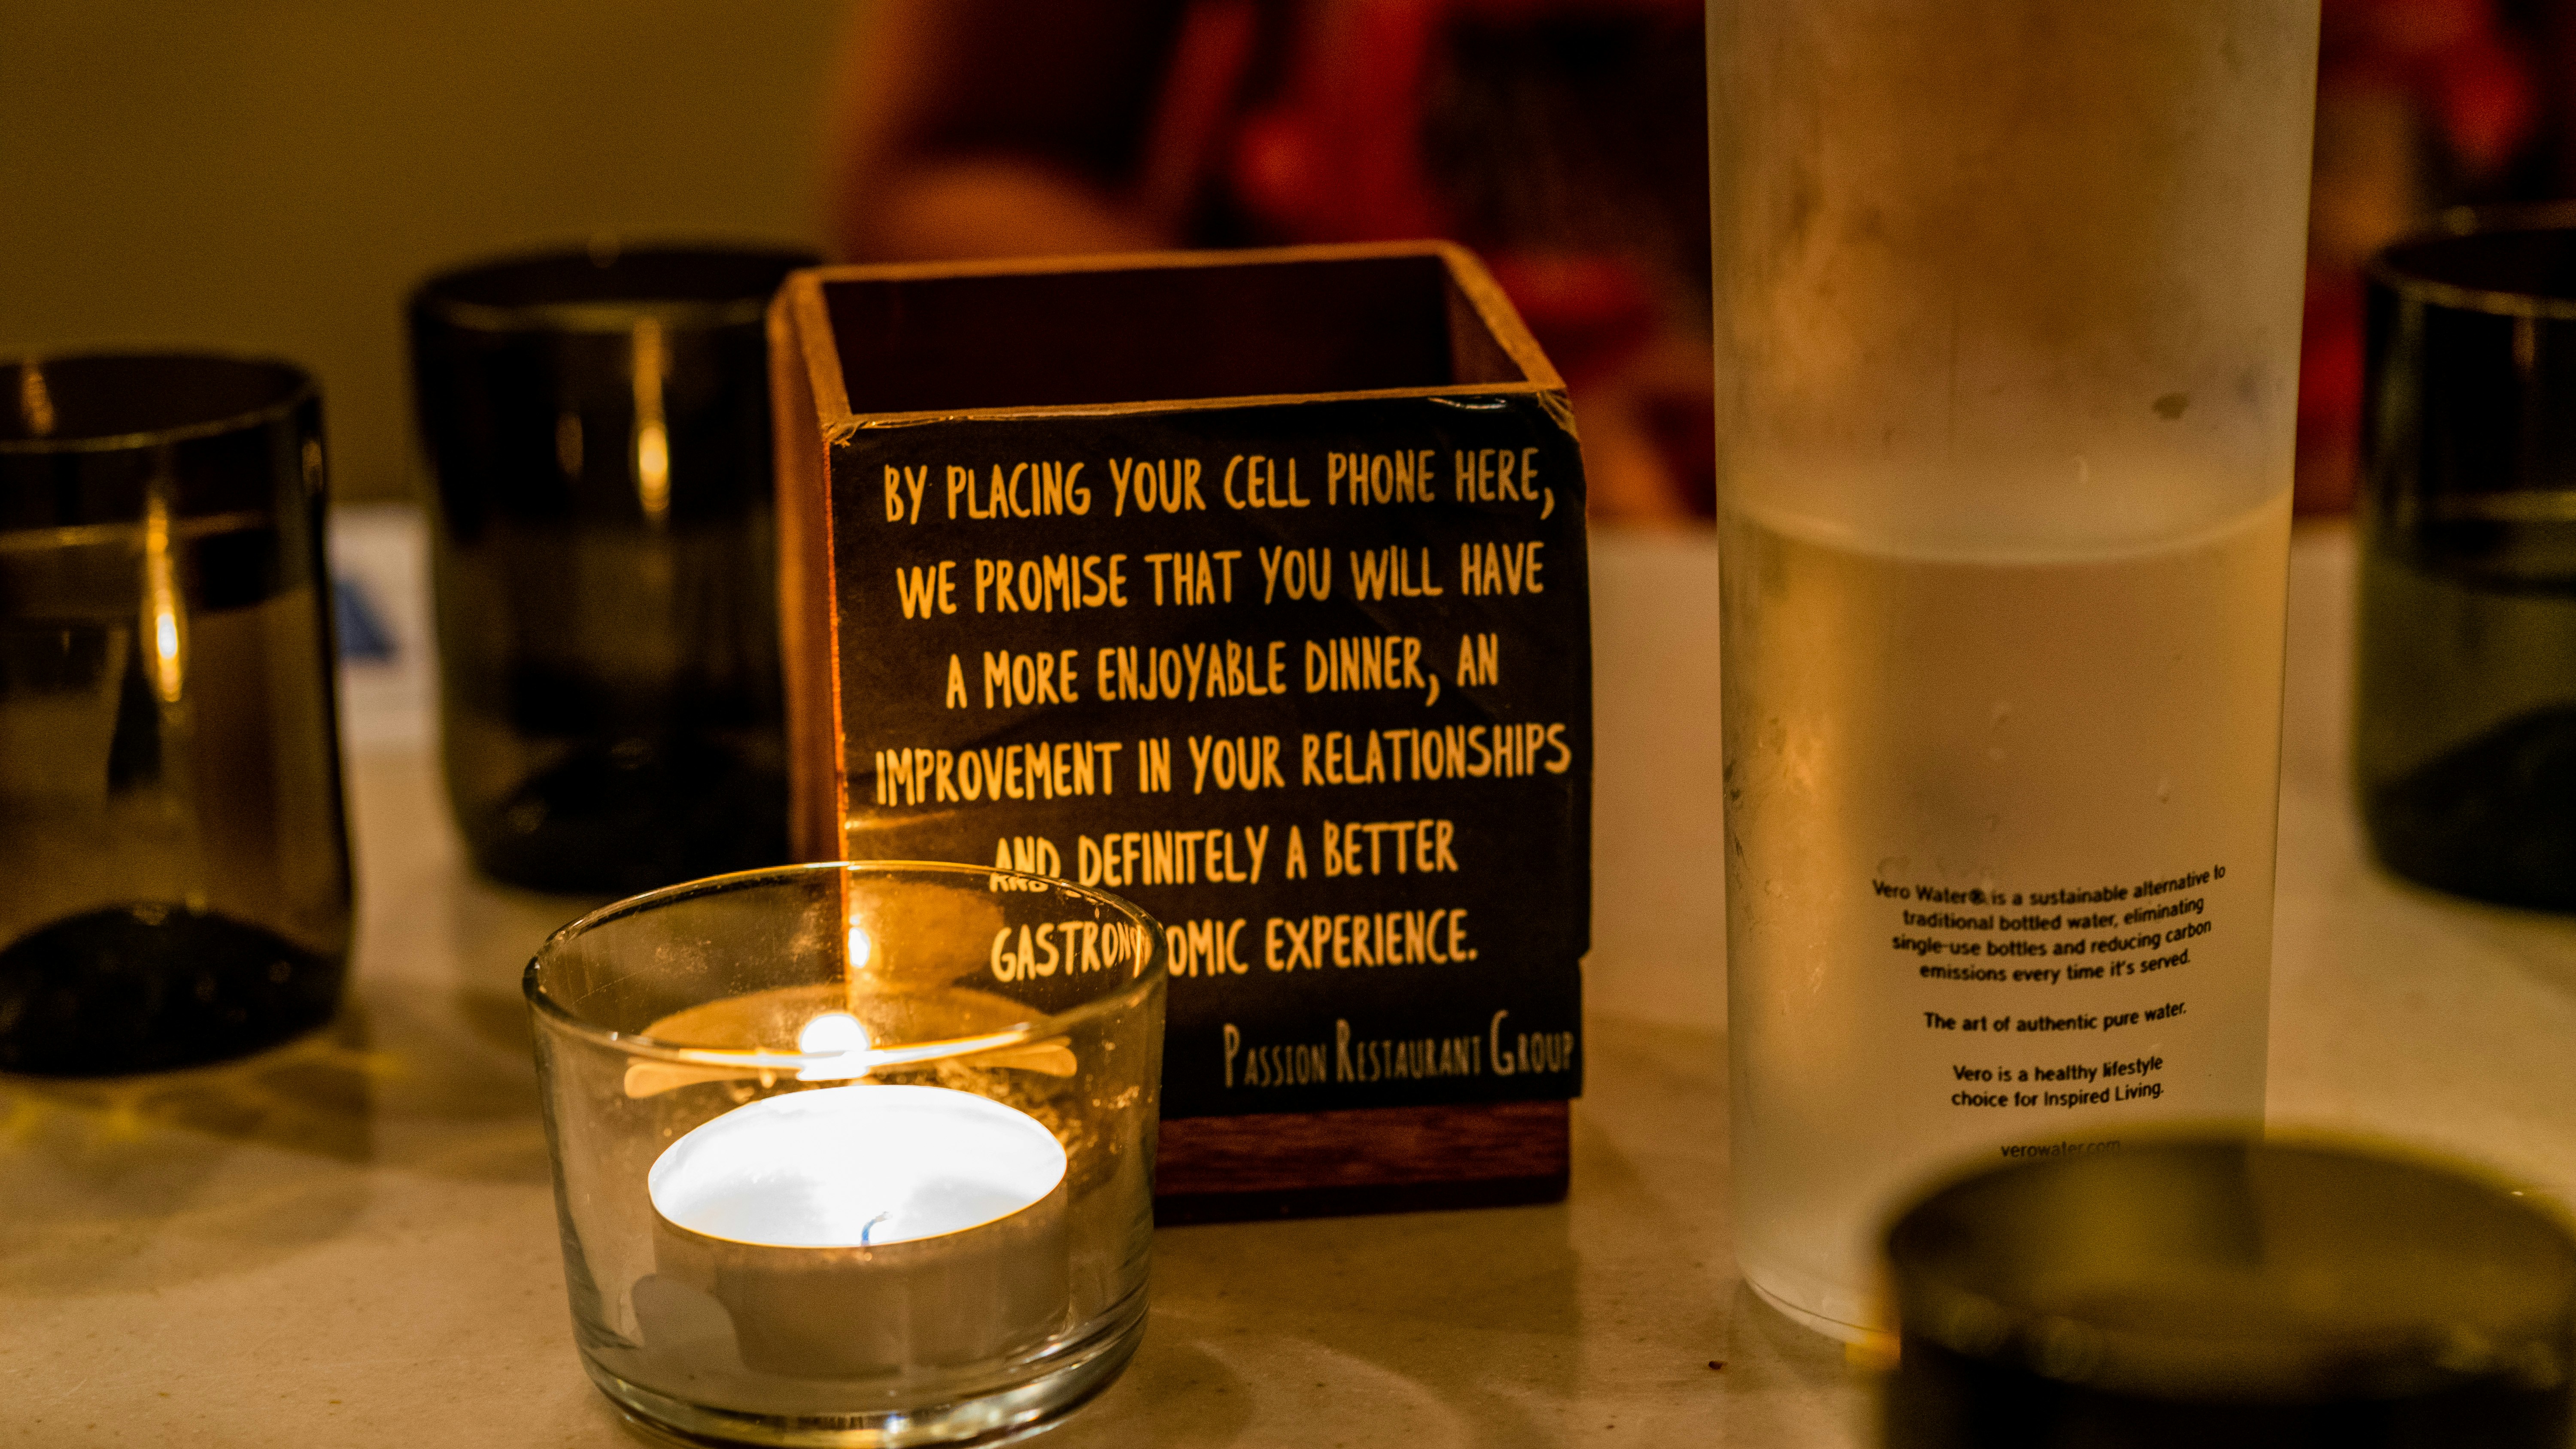 The cell phone rest box in Crazy About You restaurant.